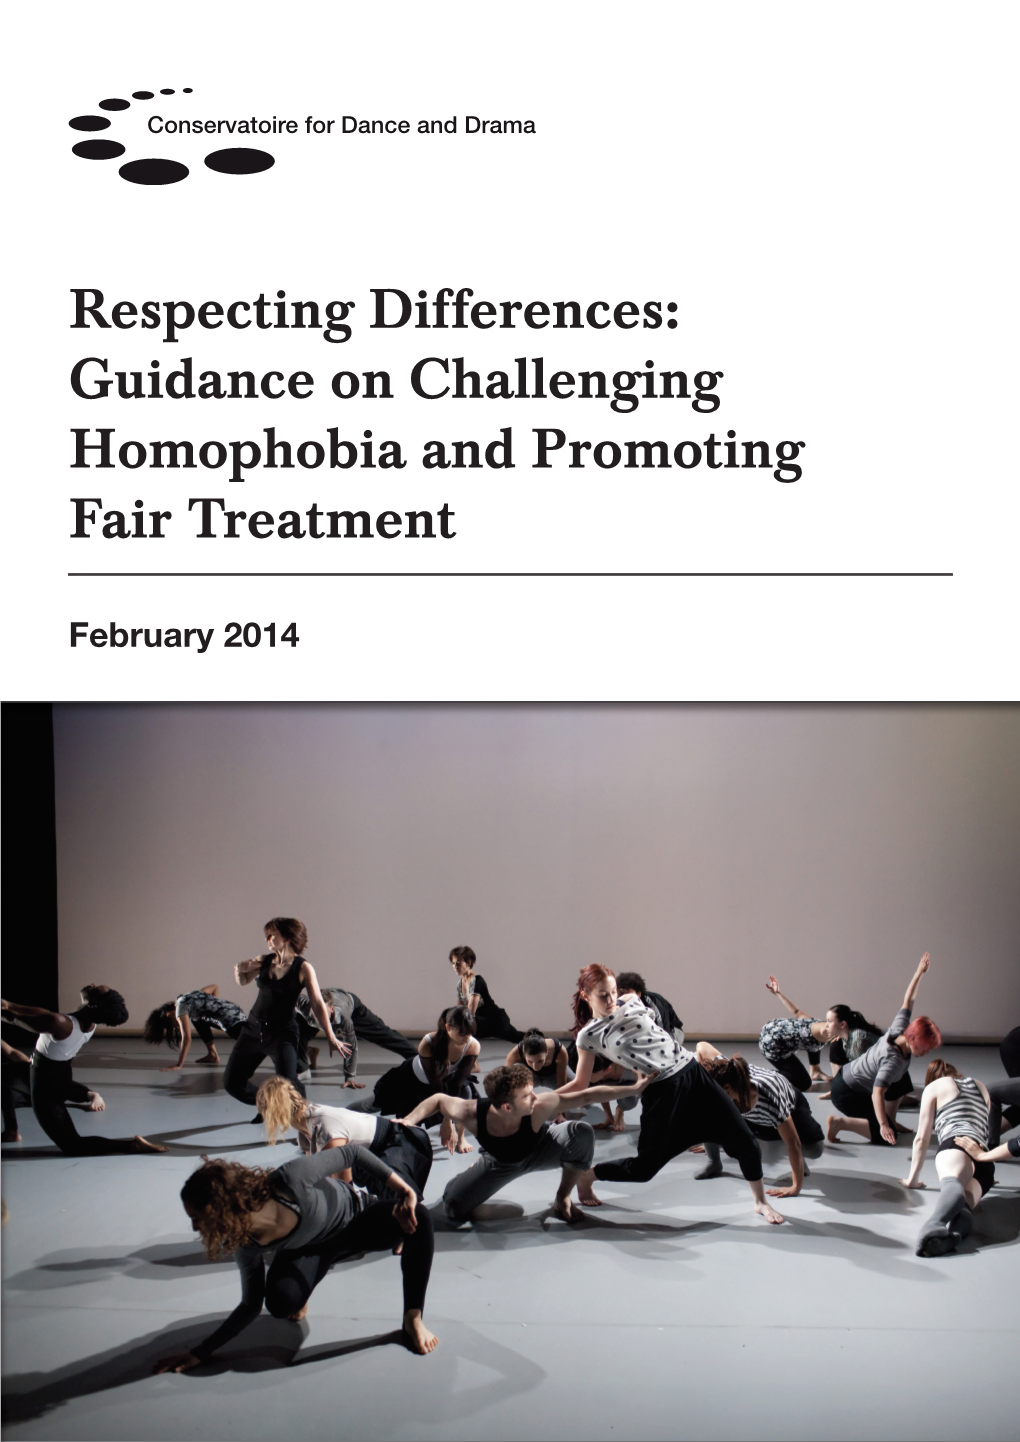 Respecting Differences: Guidance on Challenging Homophobia and Promoting Fair Treatment